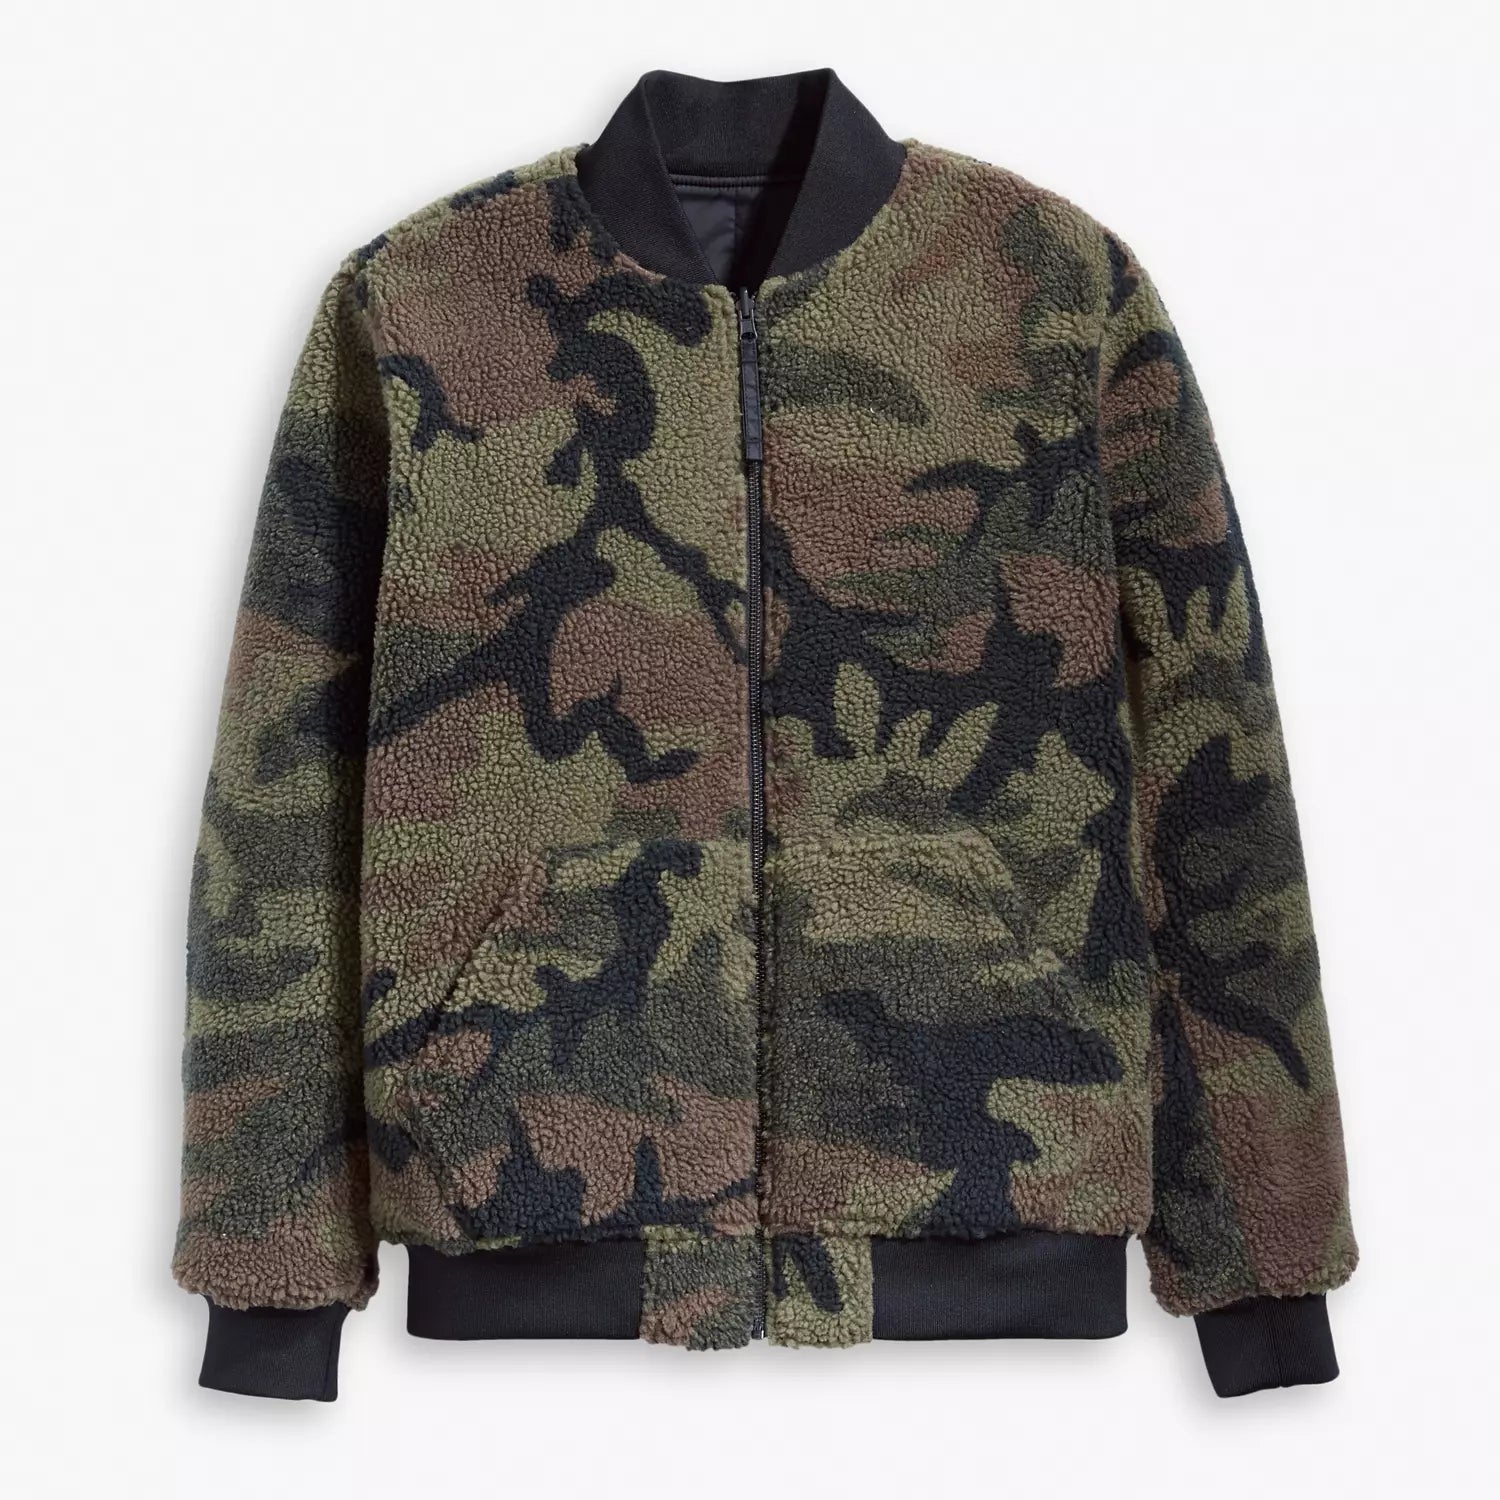 'Levis Reversible Sherpa Bomber Jacket' in 'Black/Camo' colour